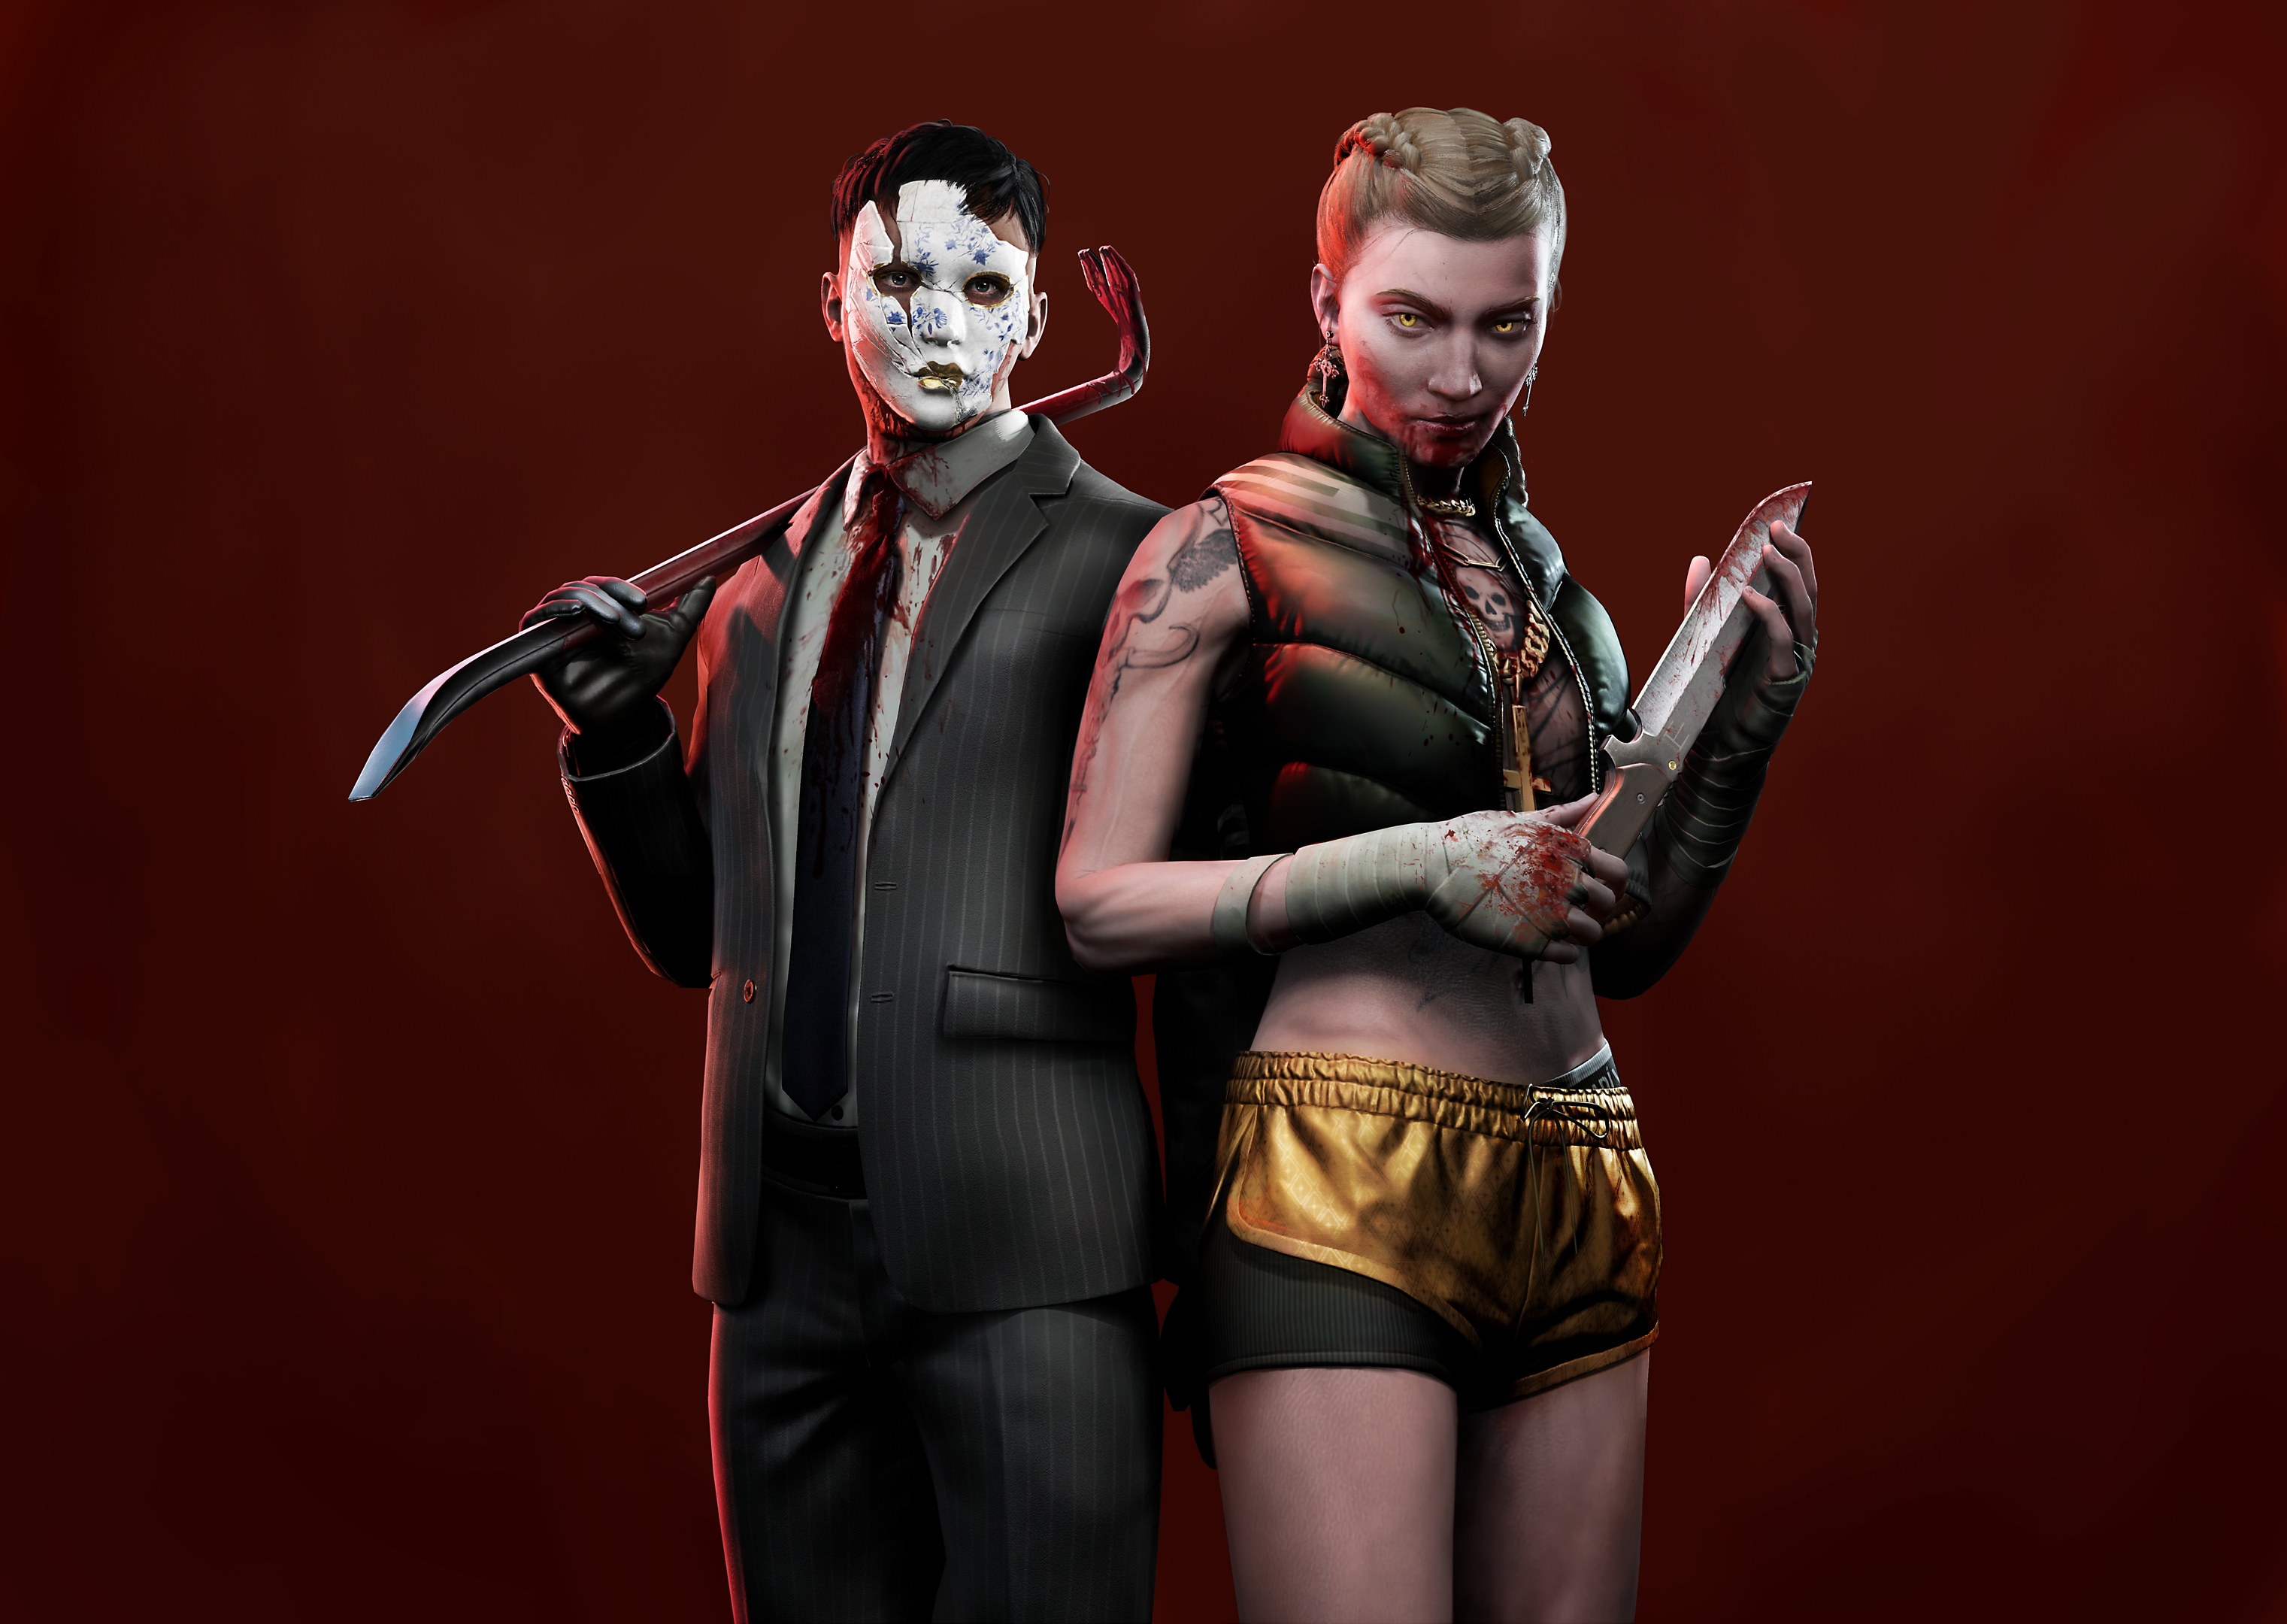 Vampire the Masquerade - Bloodhunt screenshot showing the new weapons, Crowbar and Knife